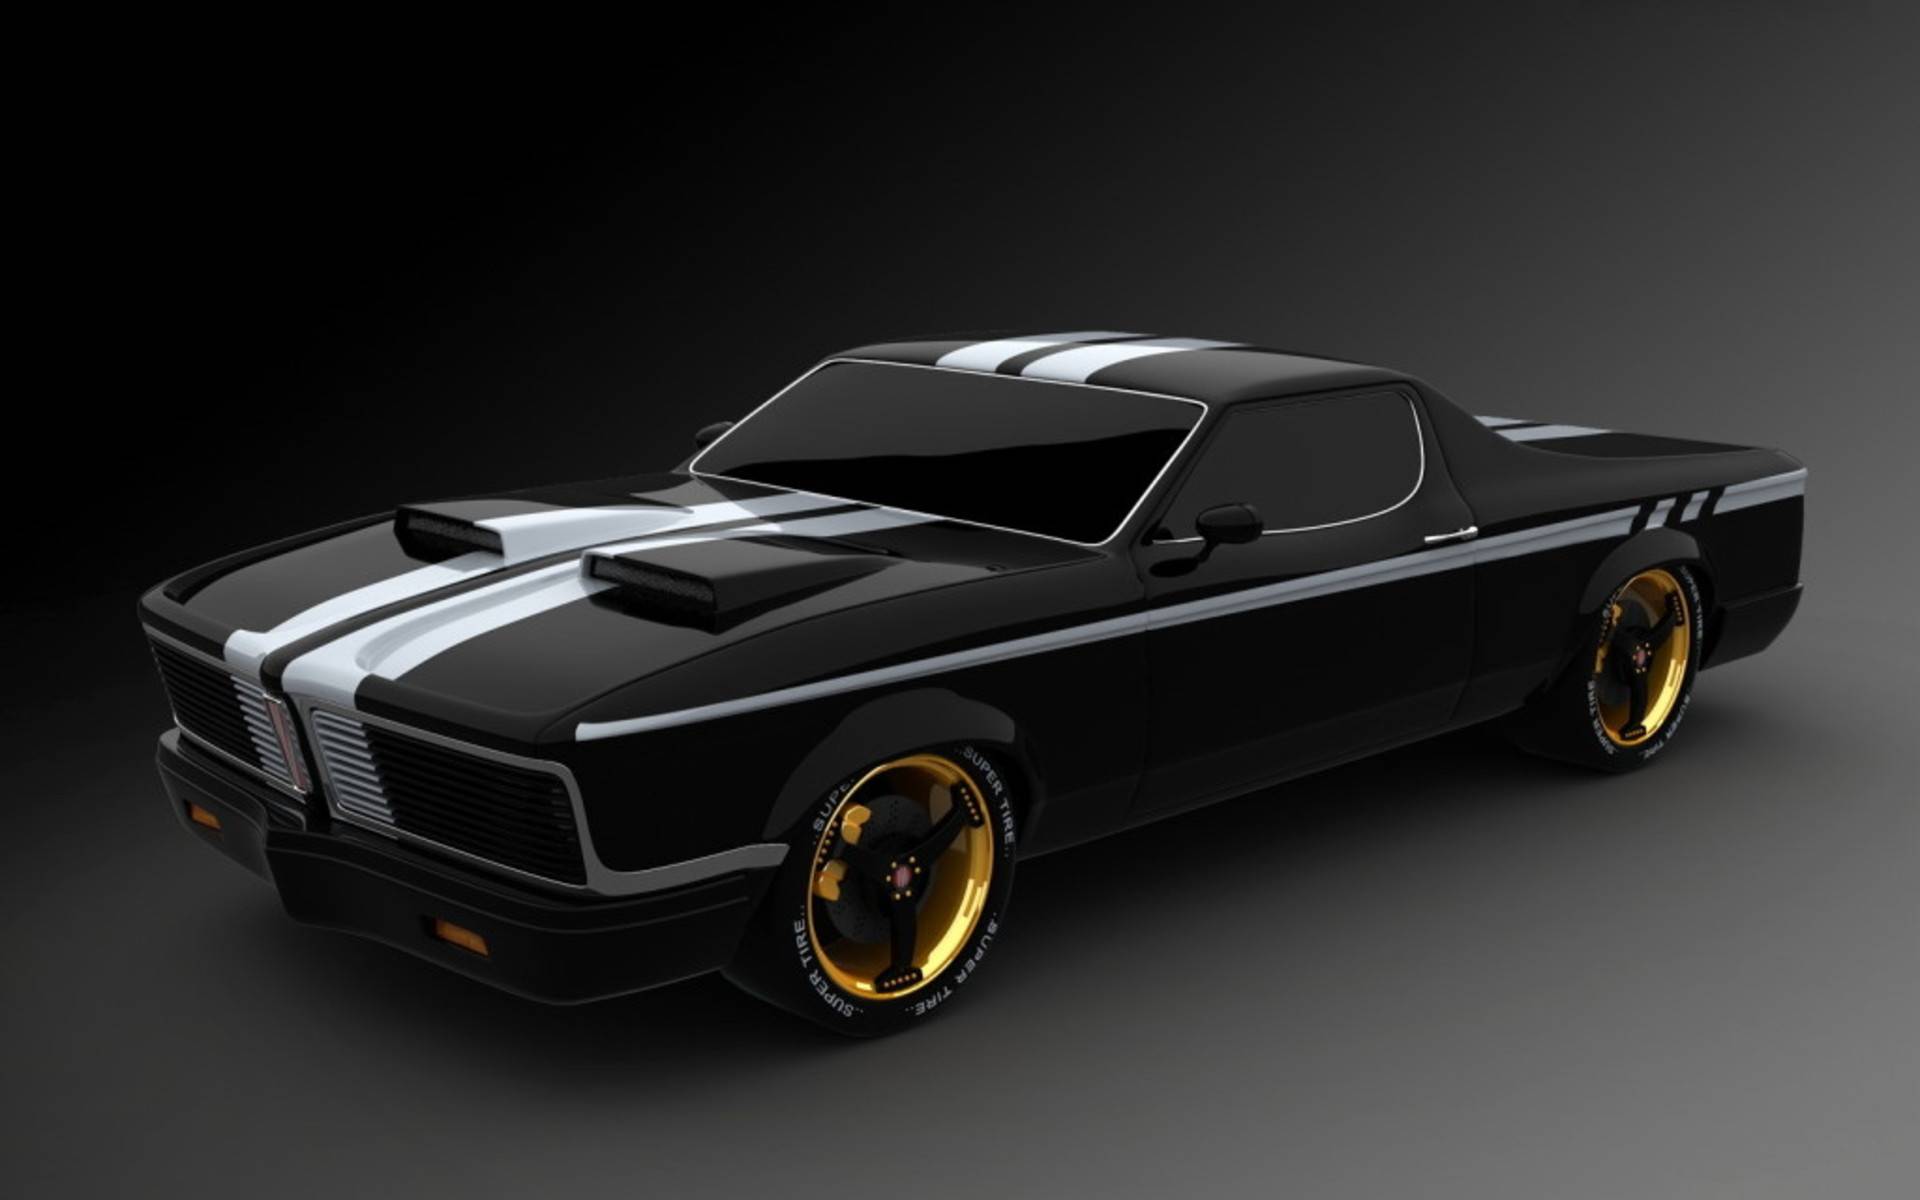 American Muscle Car Wallpaper Android Application